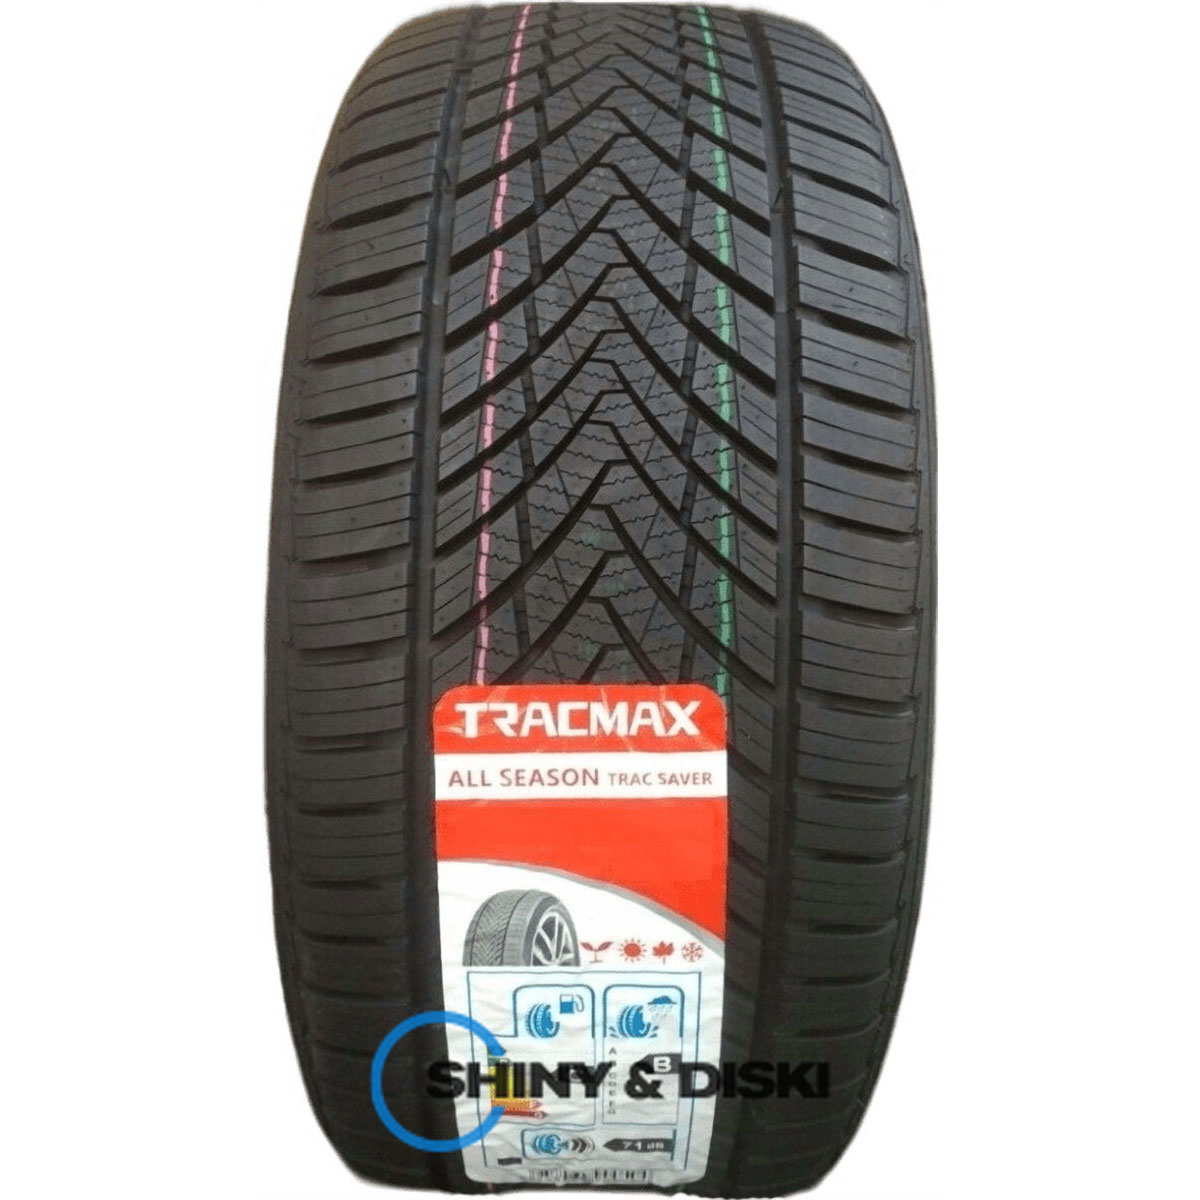 покрышки tracmax a/s trac saver 205/60 r16 96v